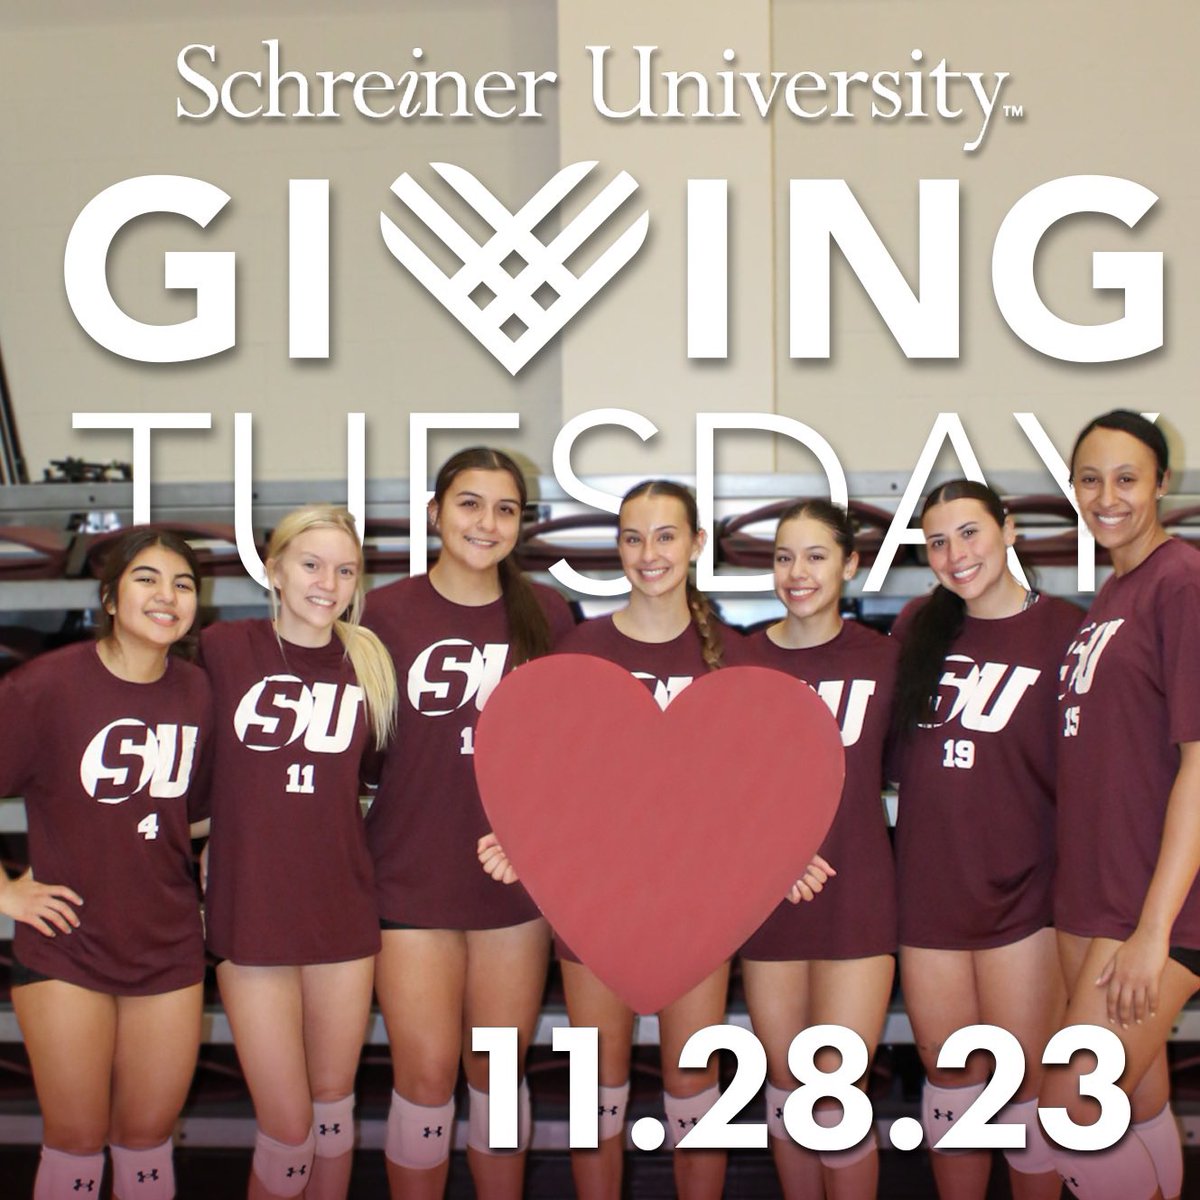 We are just two days away from Giving Tuesday! Join us in spreading the spirit of giving! Donors can give a gift of any size. To show your support early go to: schreiner.edu/givingtuesday #GivingTuesday #GoNeers